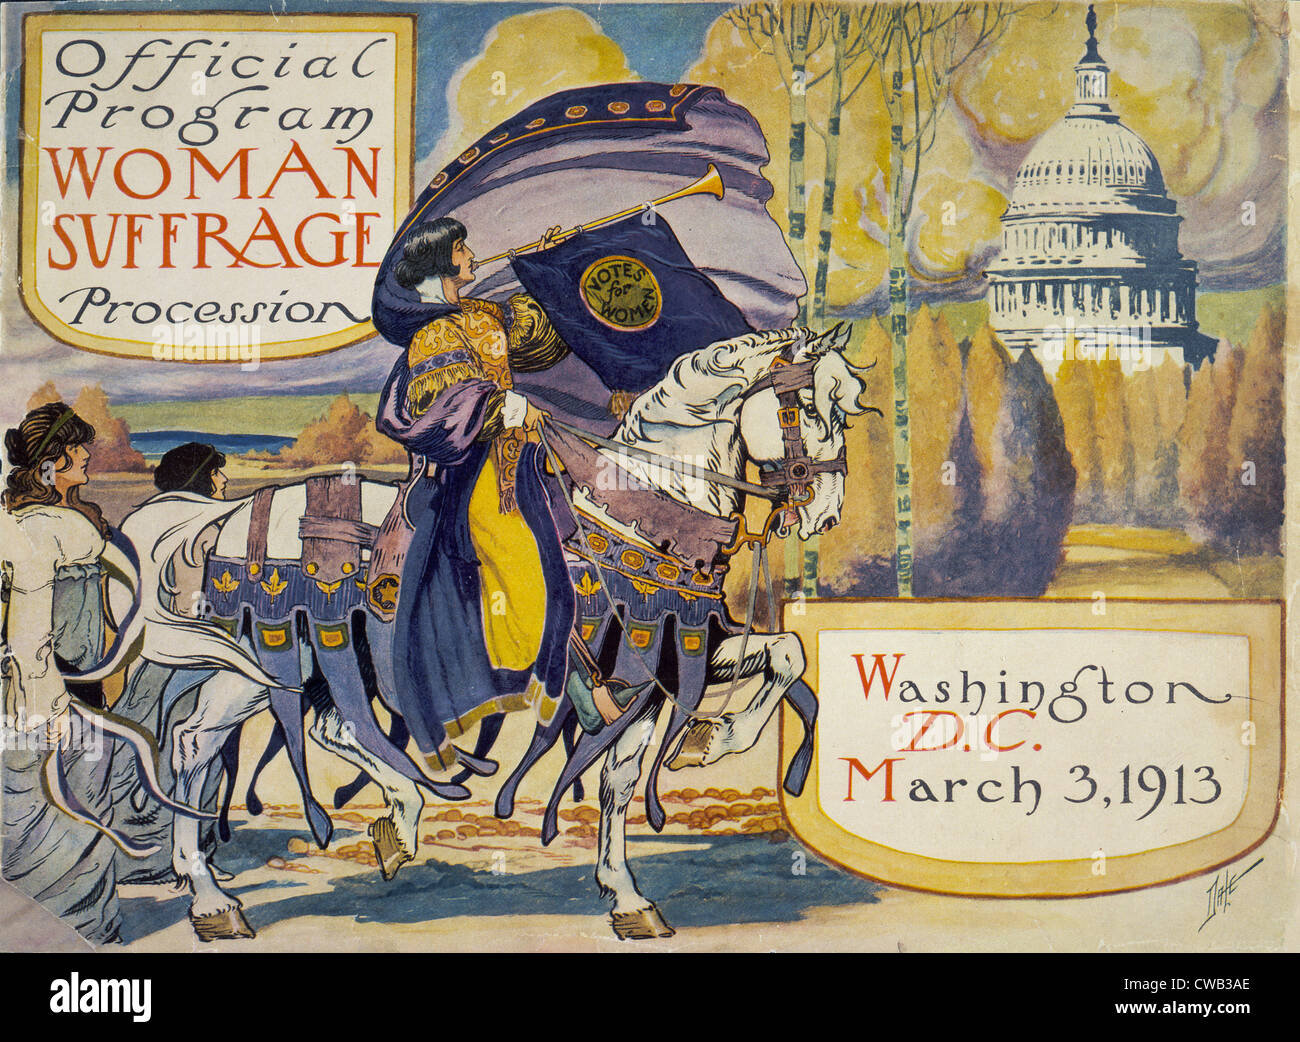 Cover of program for the National American Women's Suffrage Association procession, showing woman, in elaborate attire, with Stock Photo